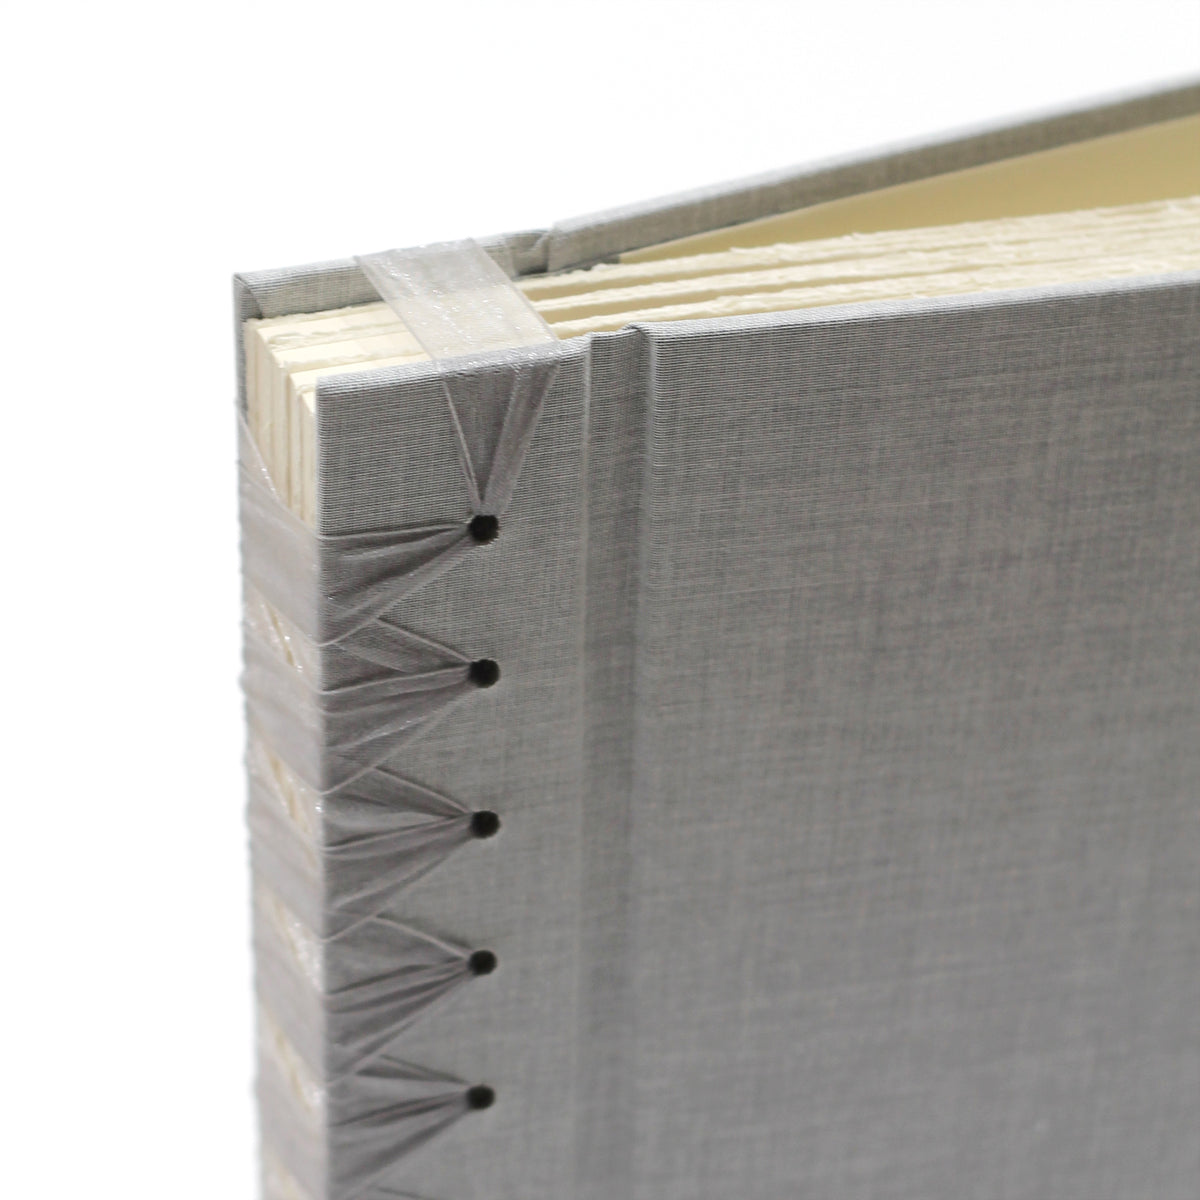 Small Paper Page Album with Dove Gray Linen Cover